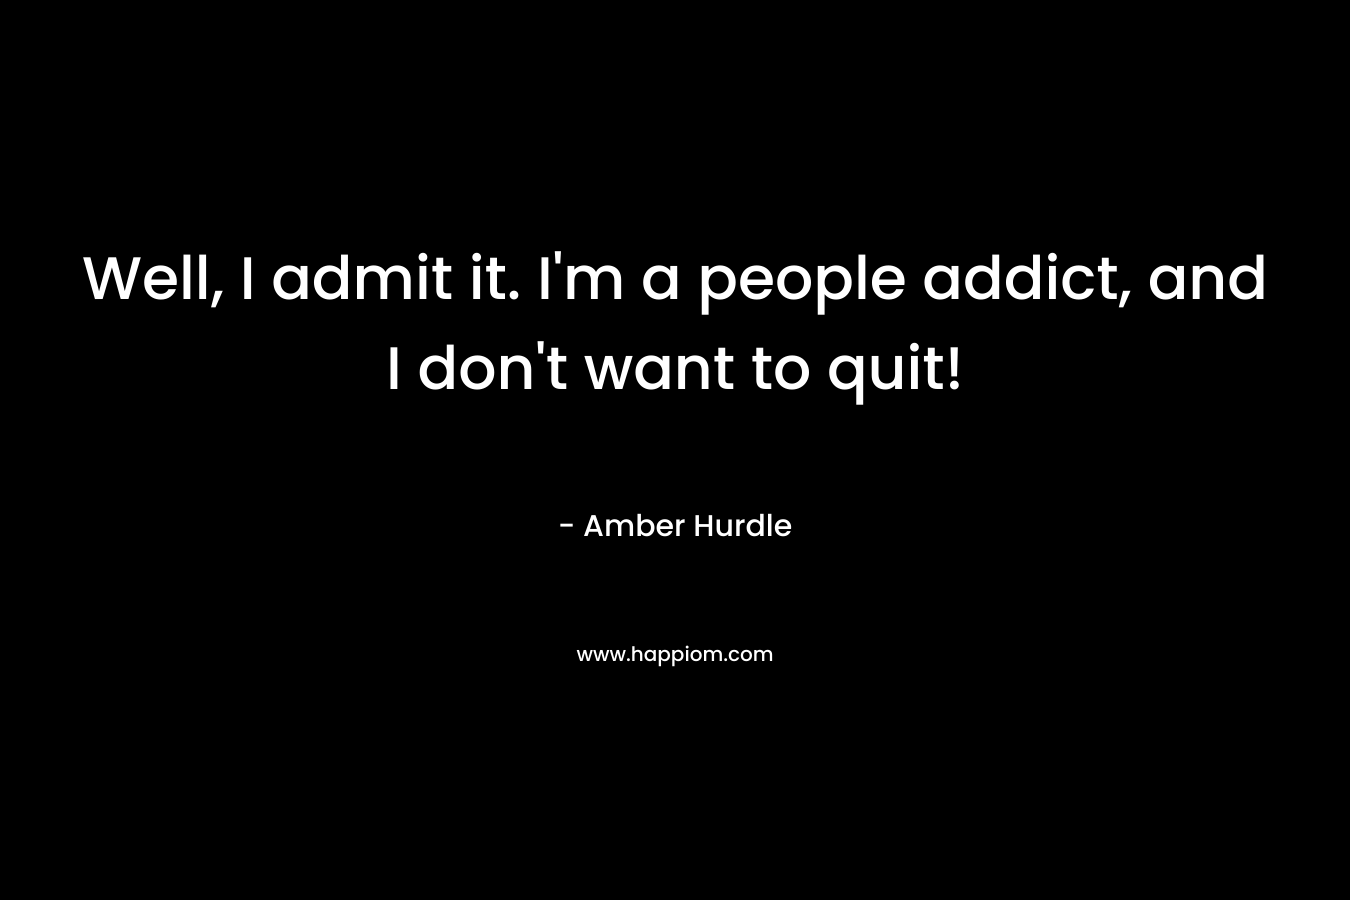 Well, I admit it. I'm a people addict, and I don't want to quit!